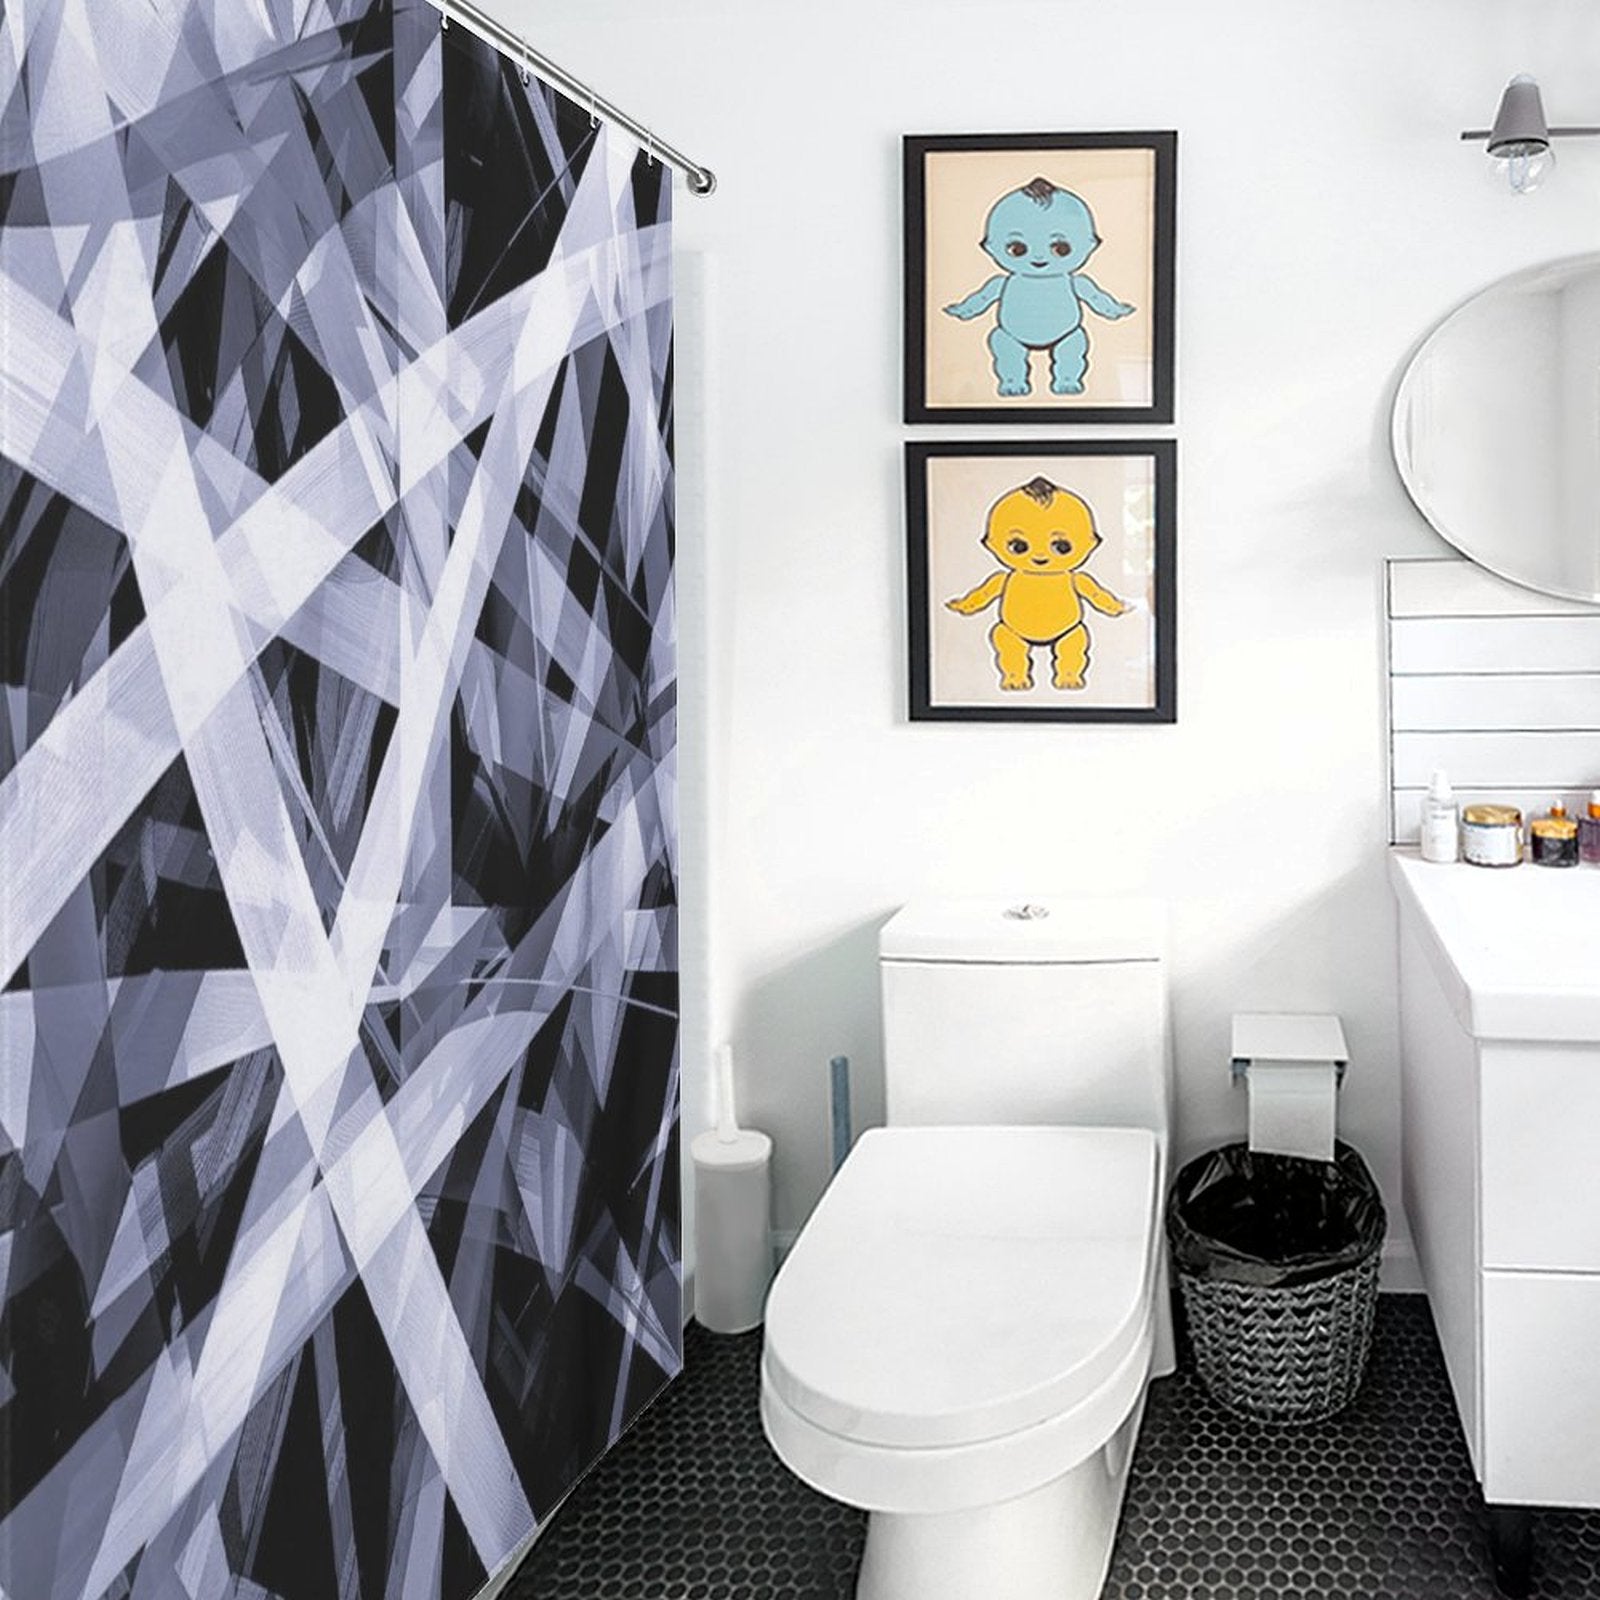 Modern bathroom with a Geometric Black and White Abstract Art Minimalist Line Shower Curtain-Cottoncat by Cotton Cat, toilet, small vanity with round mirror, and two framed geometric black and white abstract art pieces above the toilet. Black hexagon tile floor.